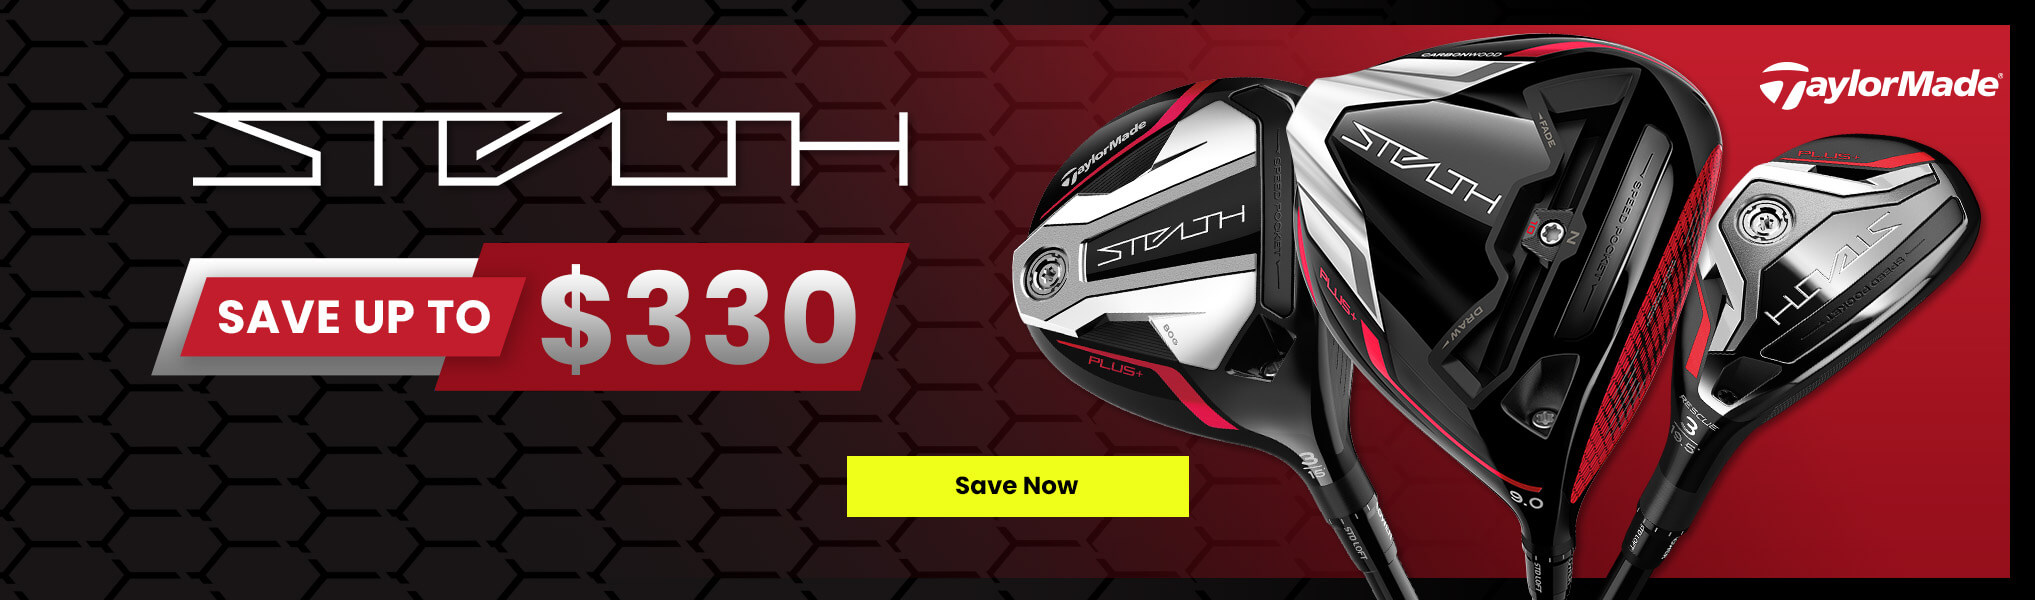 Savings on TaylorMade Stealth